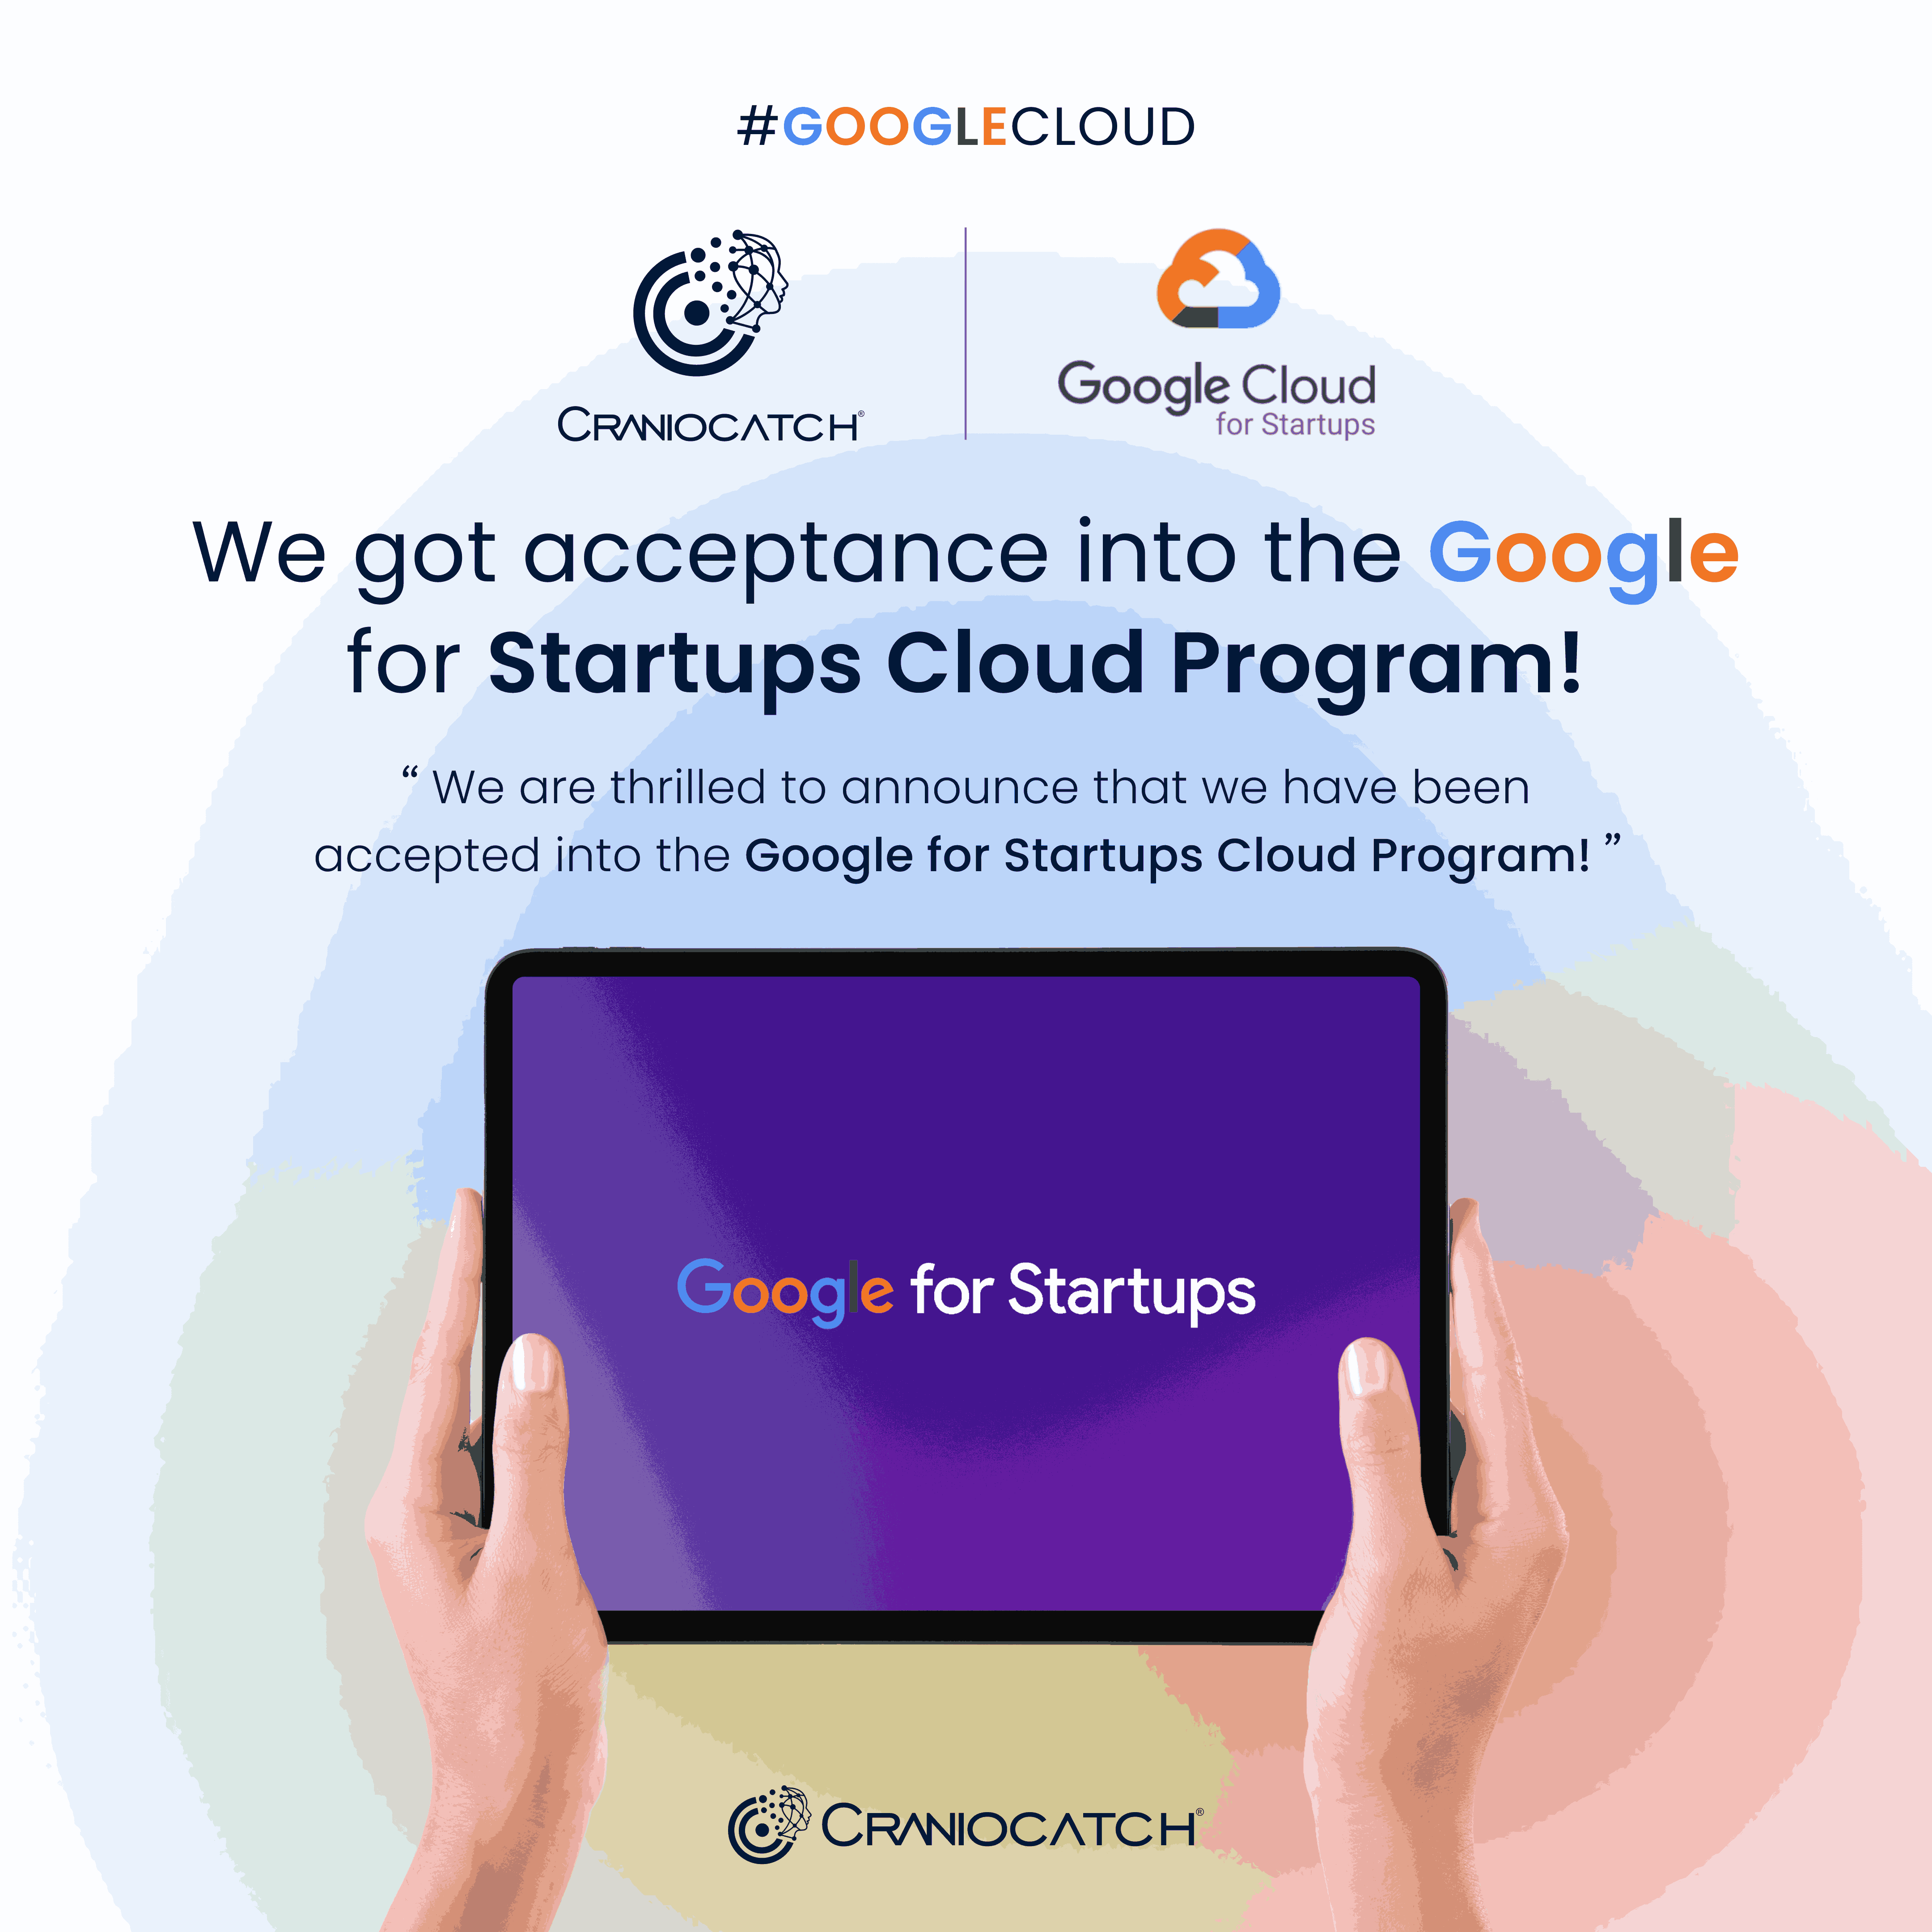 Accepted into Google for Startups Cloud Program!